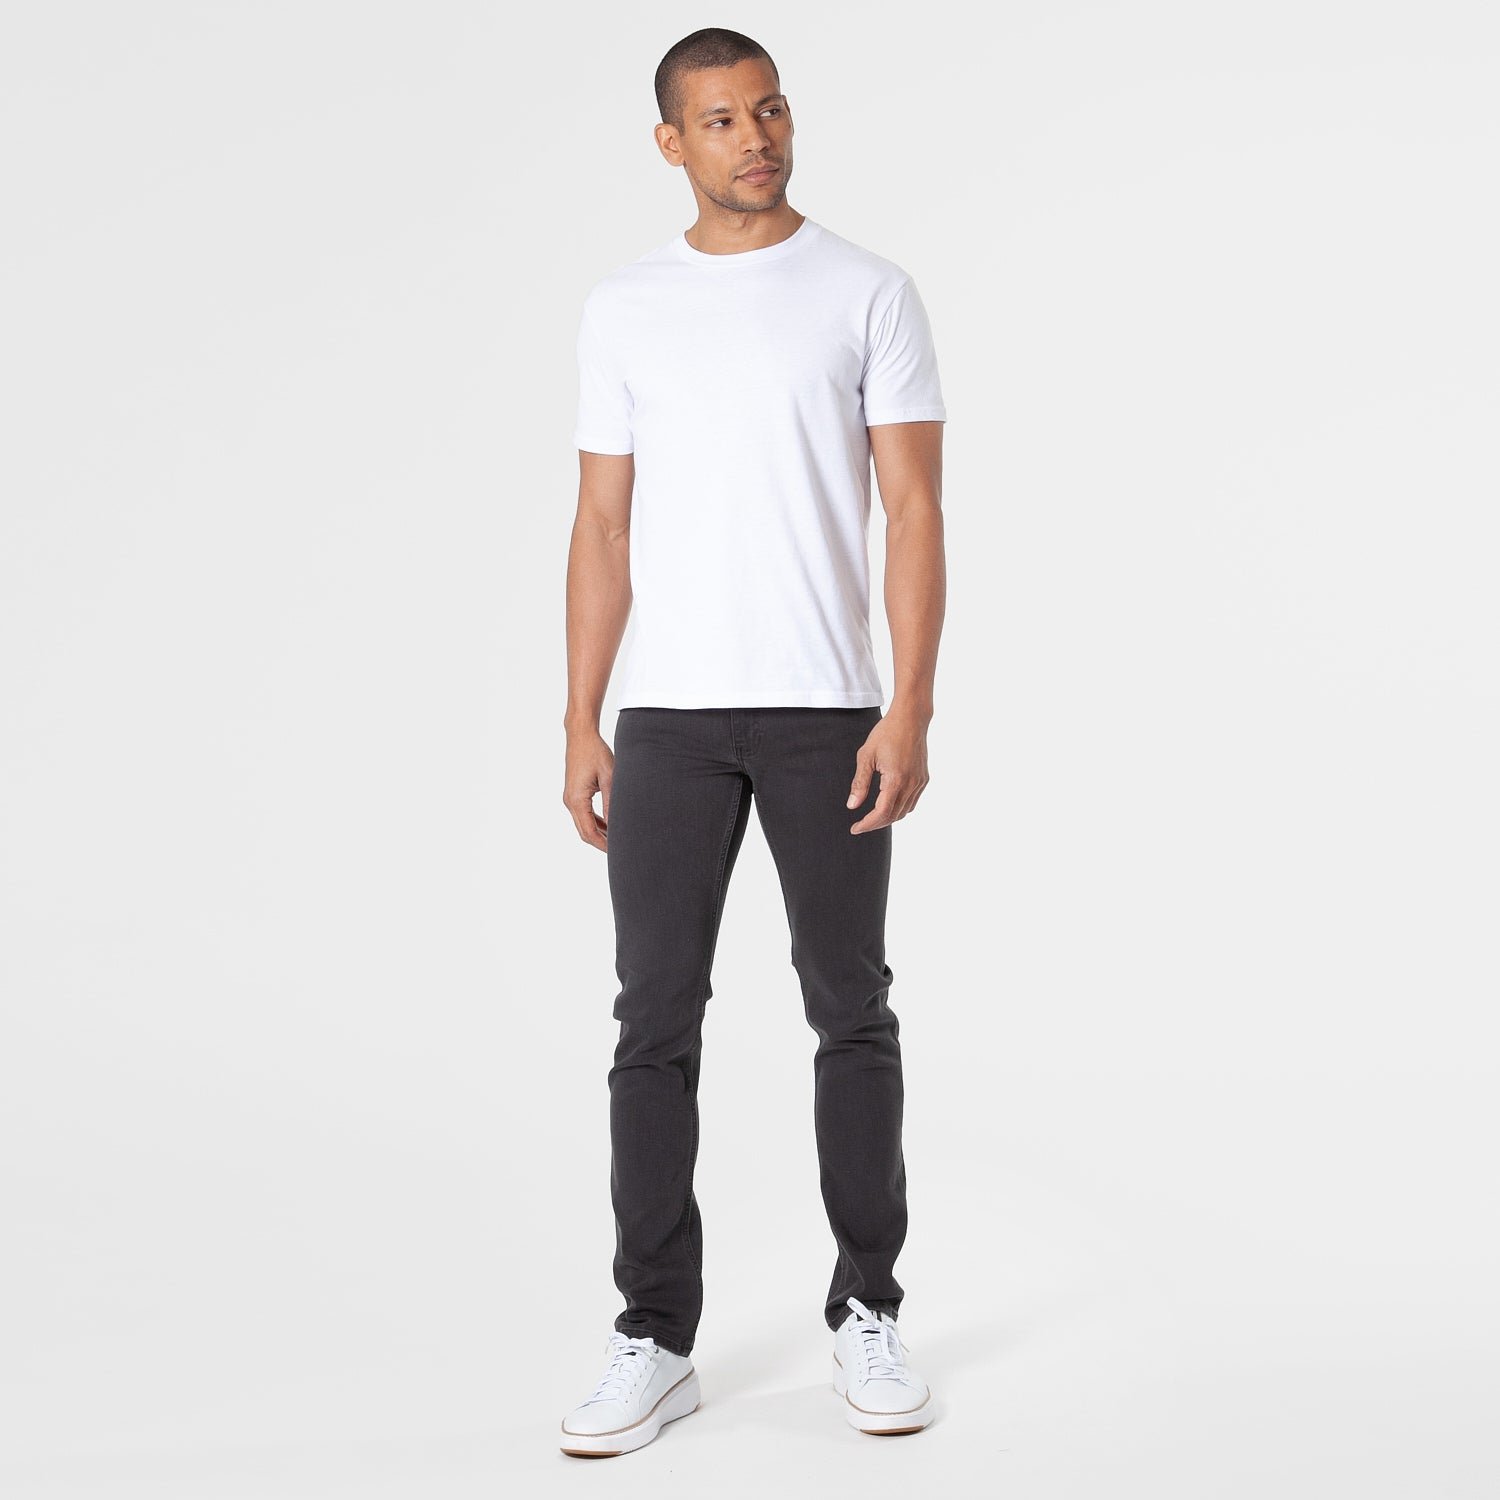 Gray and Indigo Slim Fit Comfort Jeans 2-Pack